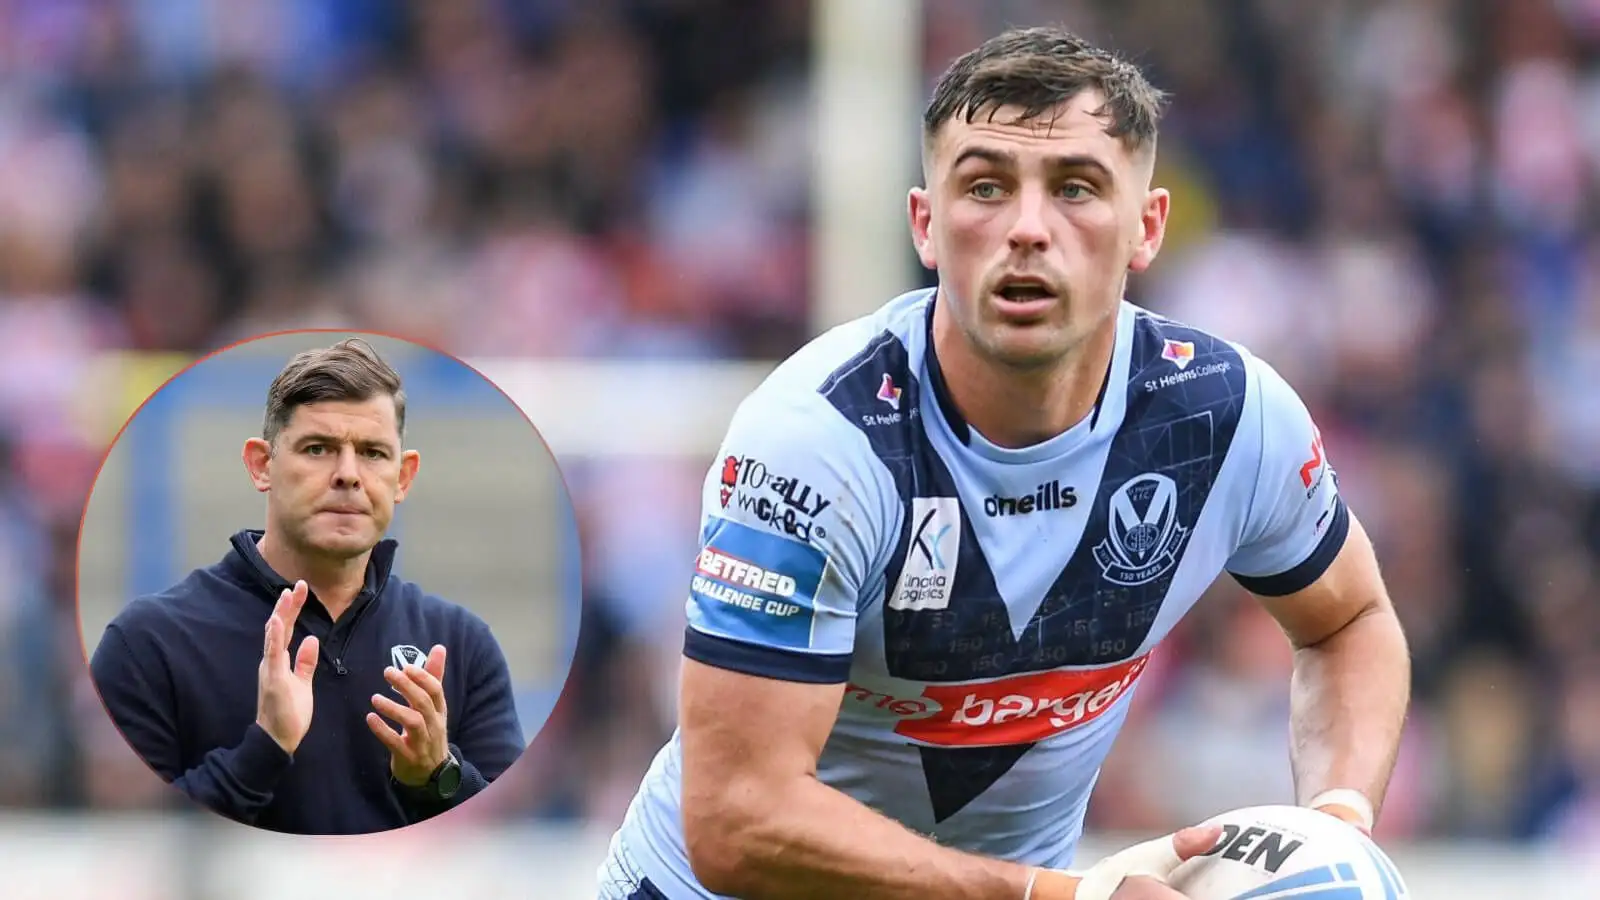 St Helens star Lewis Dodd showing his ‘quality’ again says coach; Paul Wellens defends half-back amid form criticism